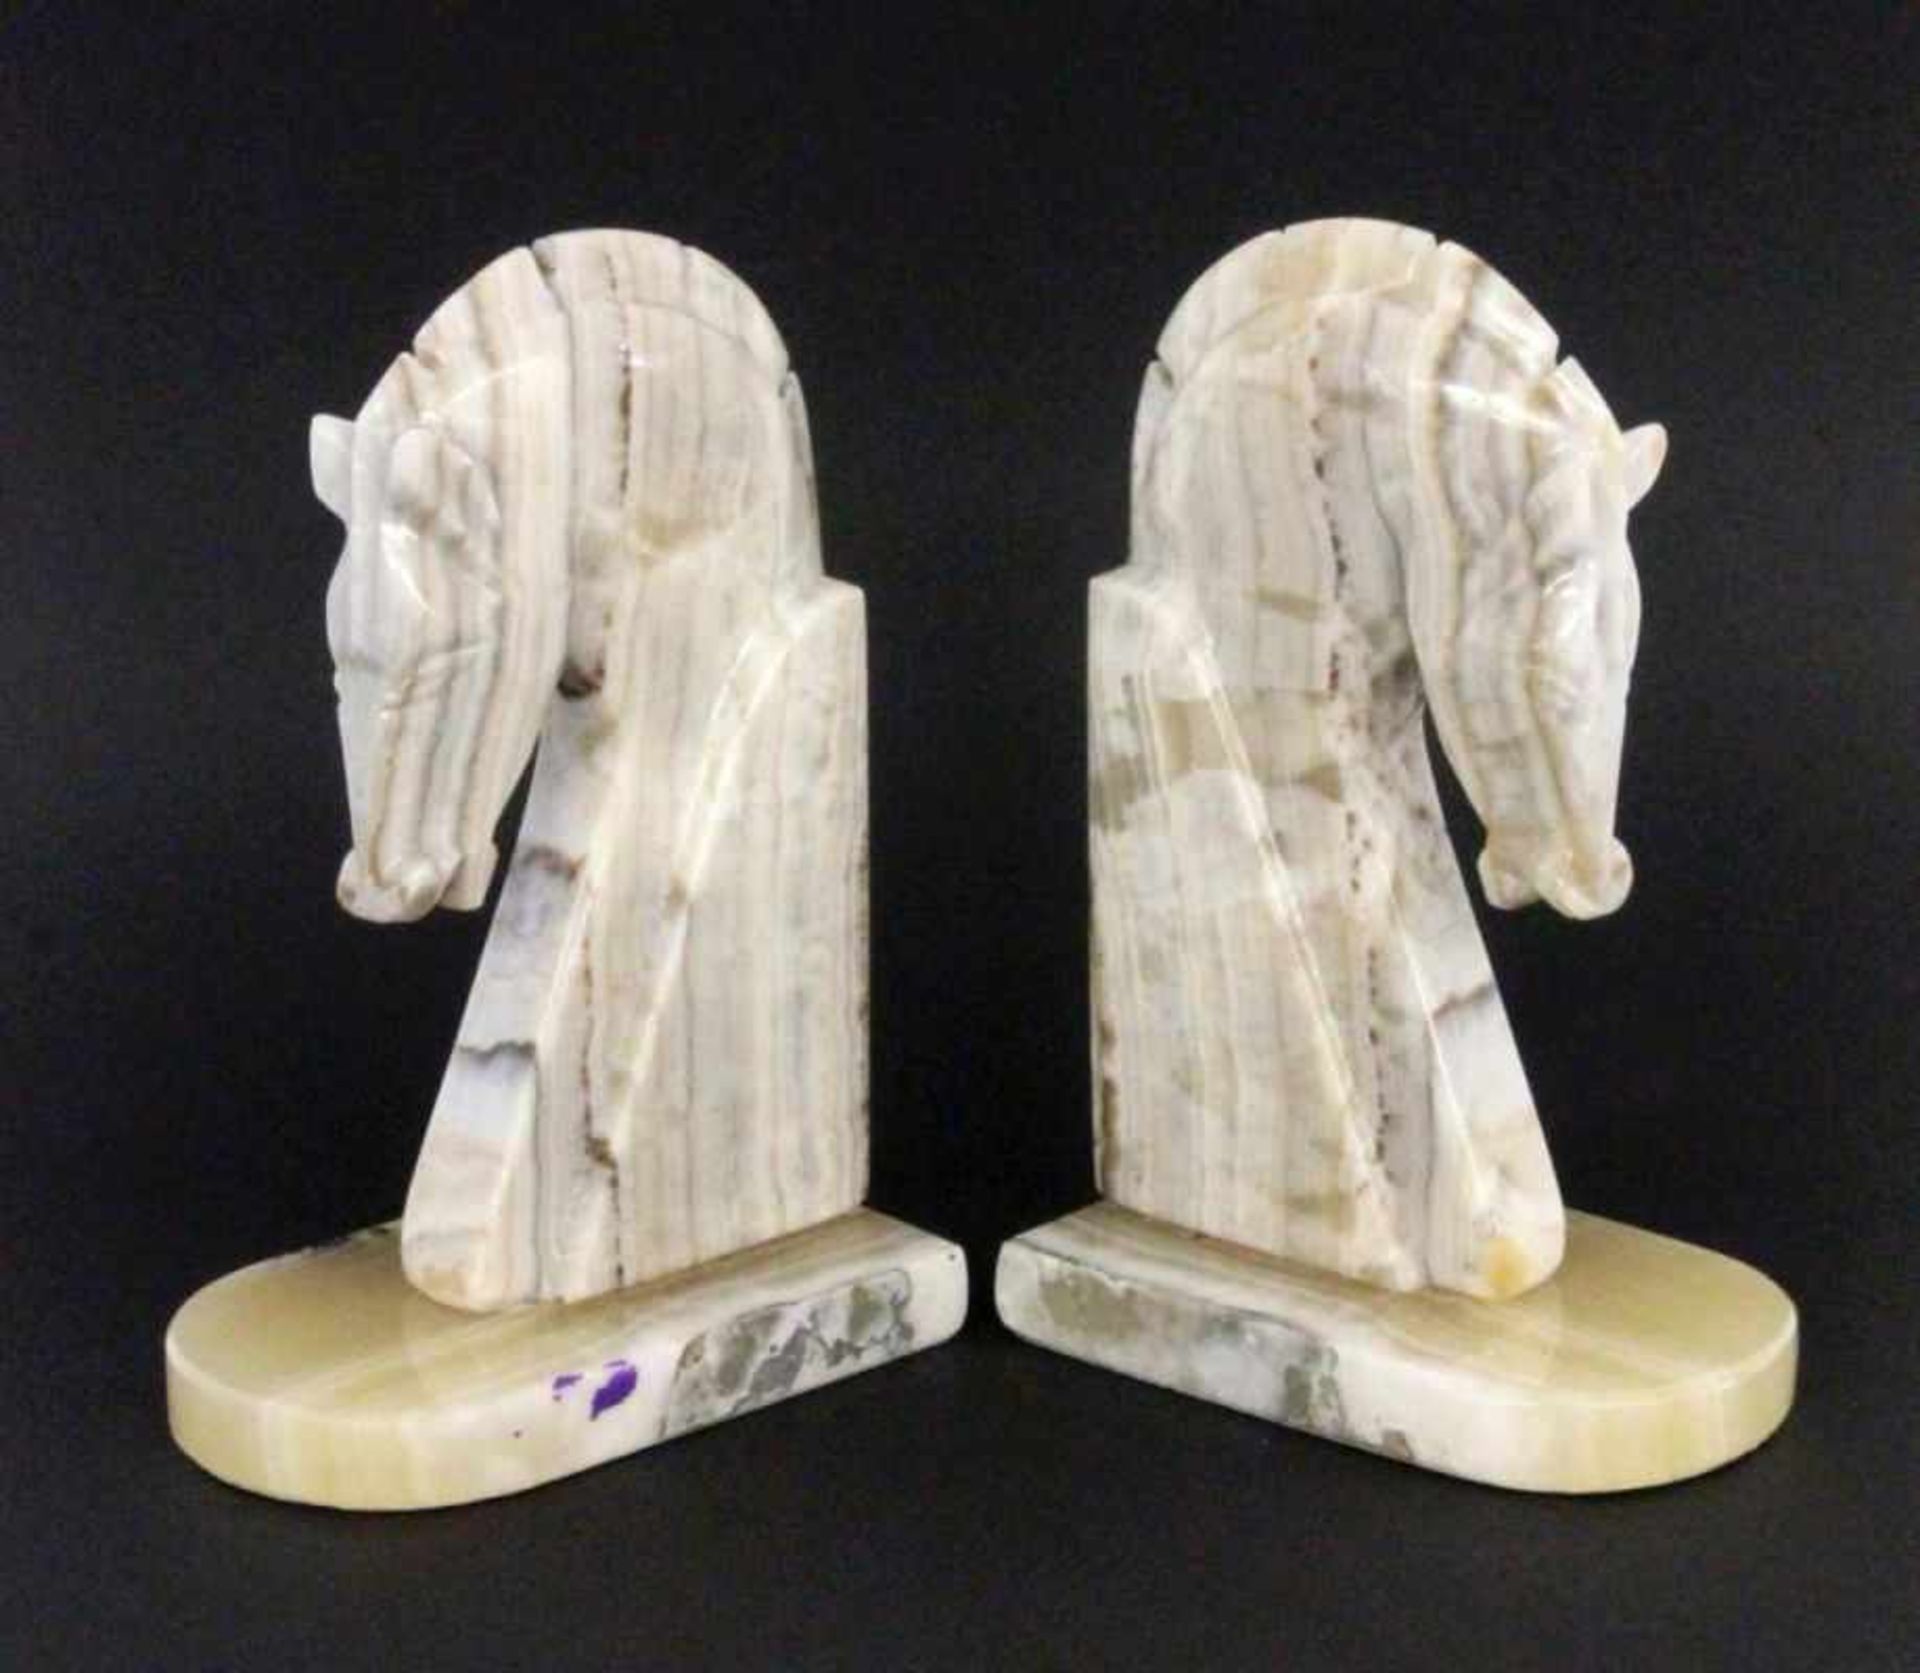 A PAIR OF ART DECO BOOKENDS Stylised marble horse busts. 23 cm high